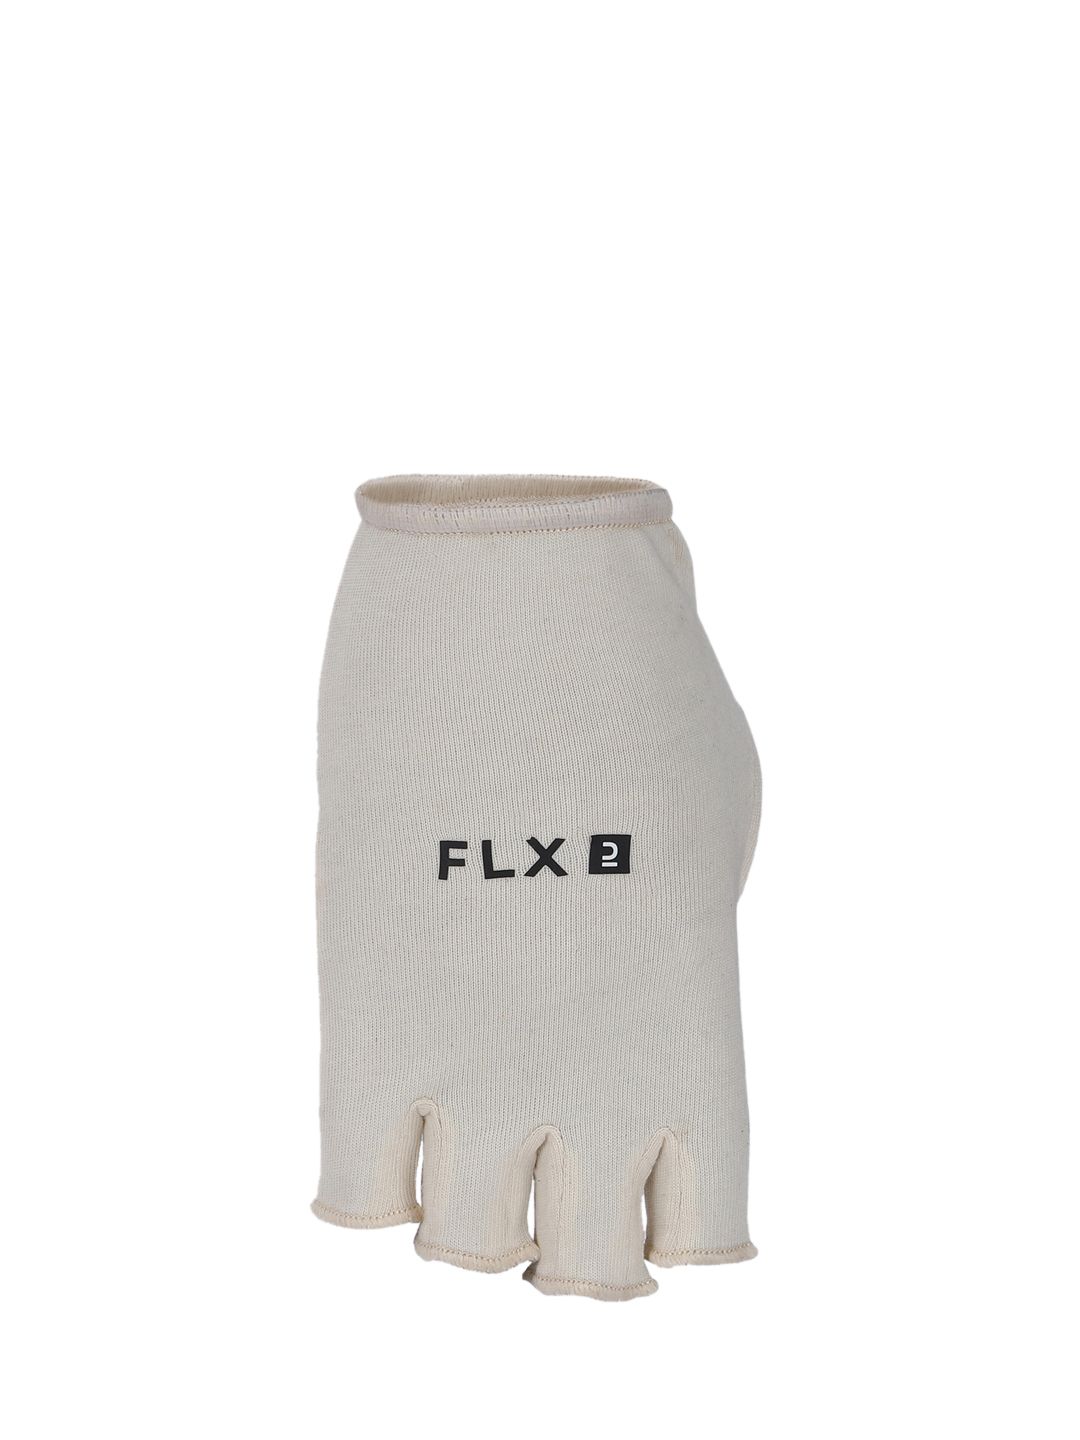 FLX By Decathlon Unisex Cream-Coloured Solid Sweat Managing Cricket Batting Inner Gloves Price in India